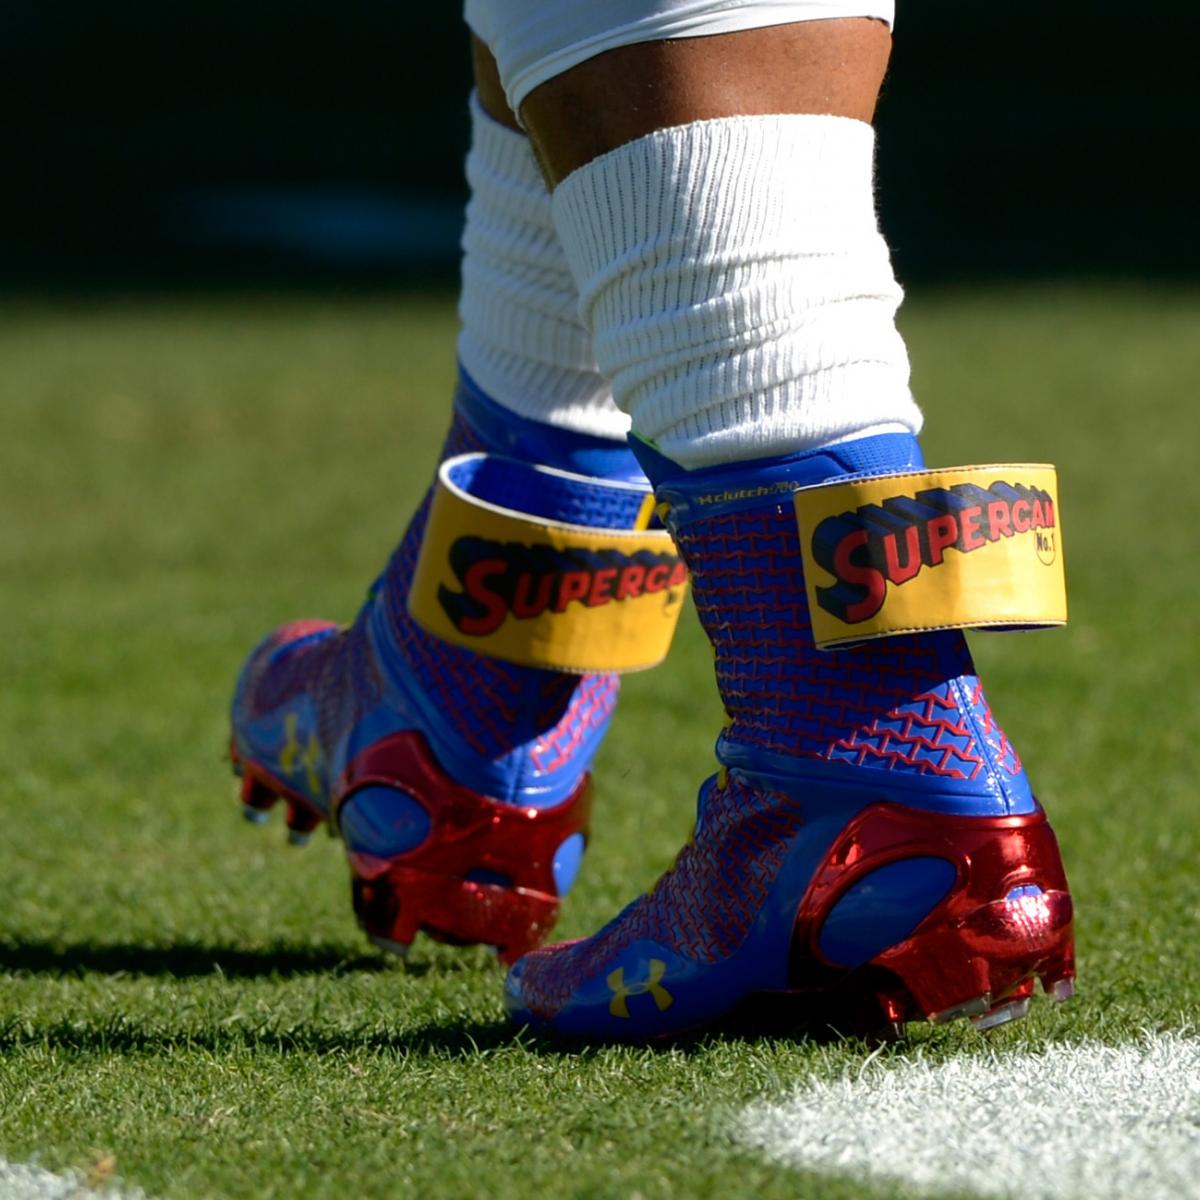 Cam Newton Wears 'Super Cam' Cleats Before 49ers-Panthers Playoff Game | Bleacher ...1200 x 1200